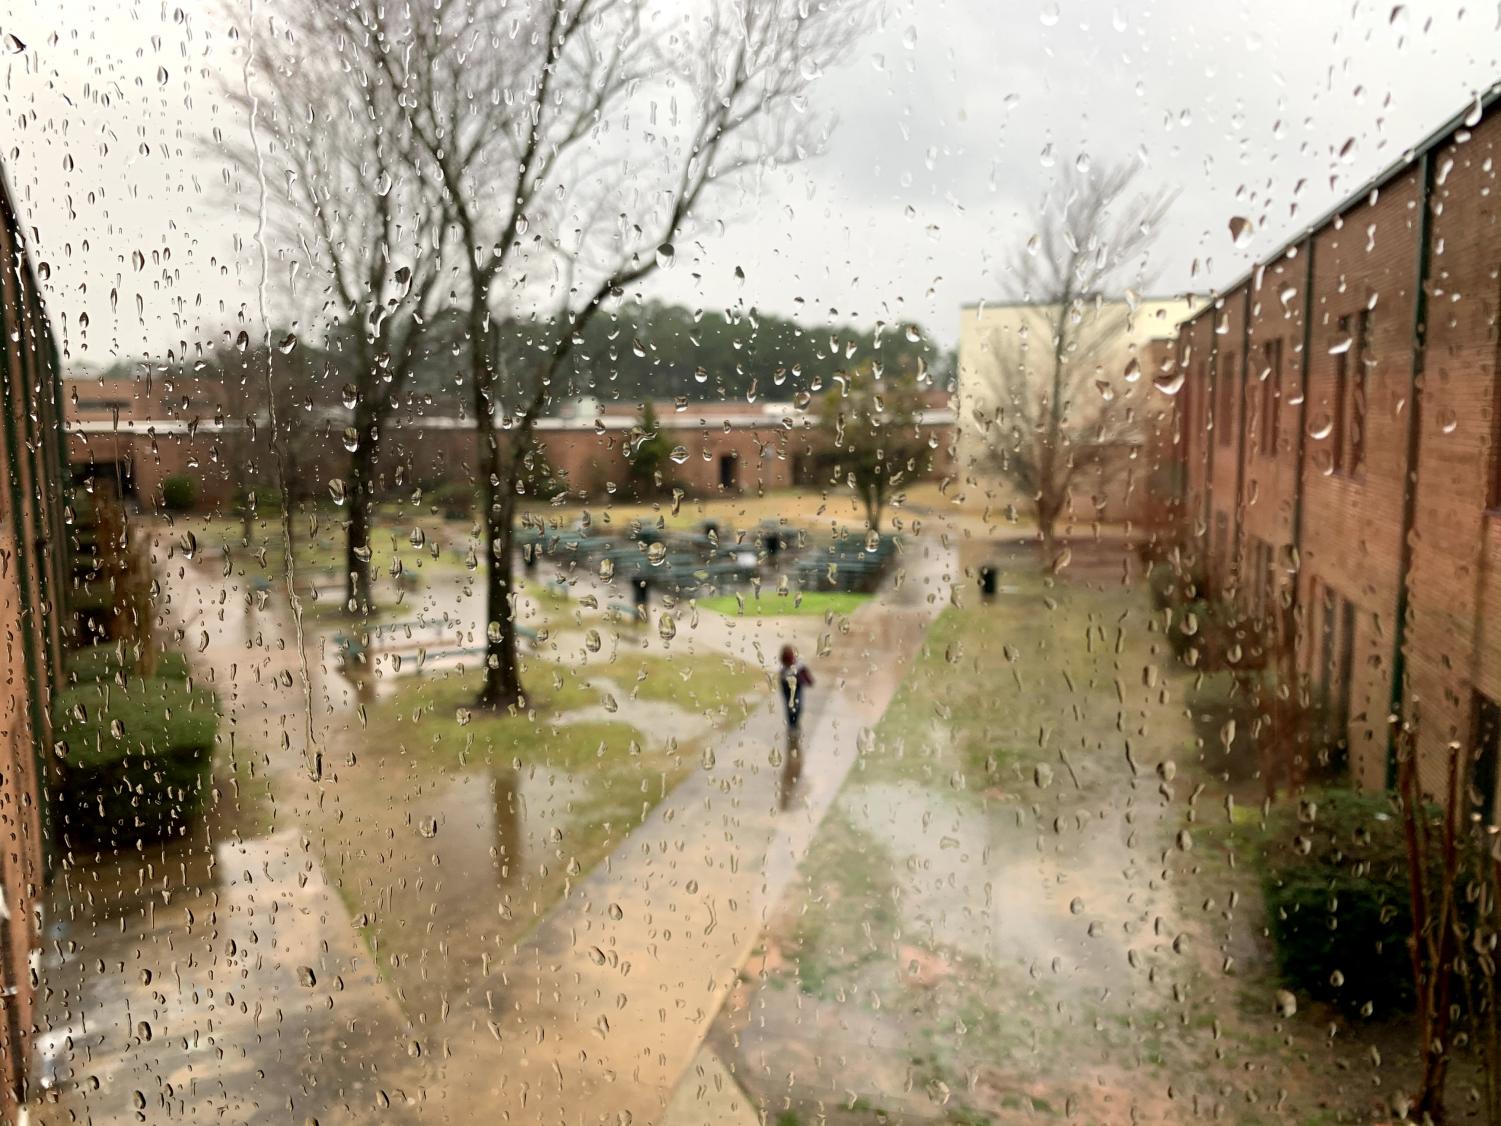 A+picture+of+the+courtyard%2C+taken+from+the+upstairs+senior+hallway%2C+on+March+2%2C+2020%2C+10+days+before+the+lockdown.